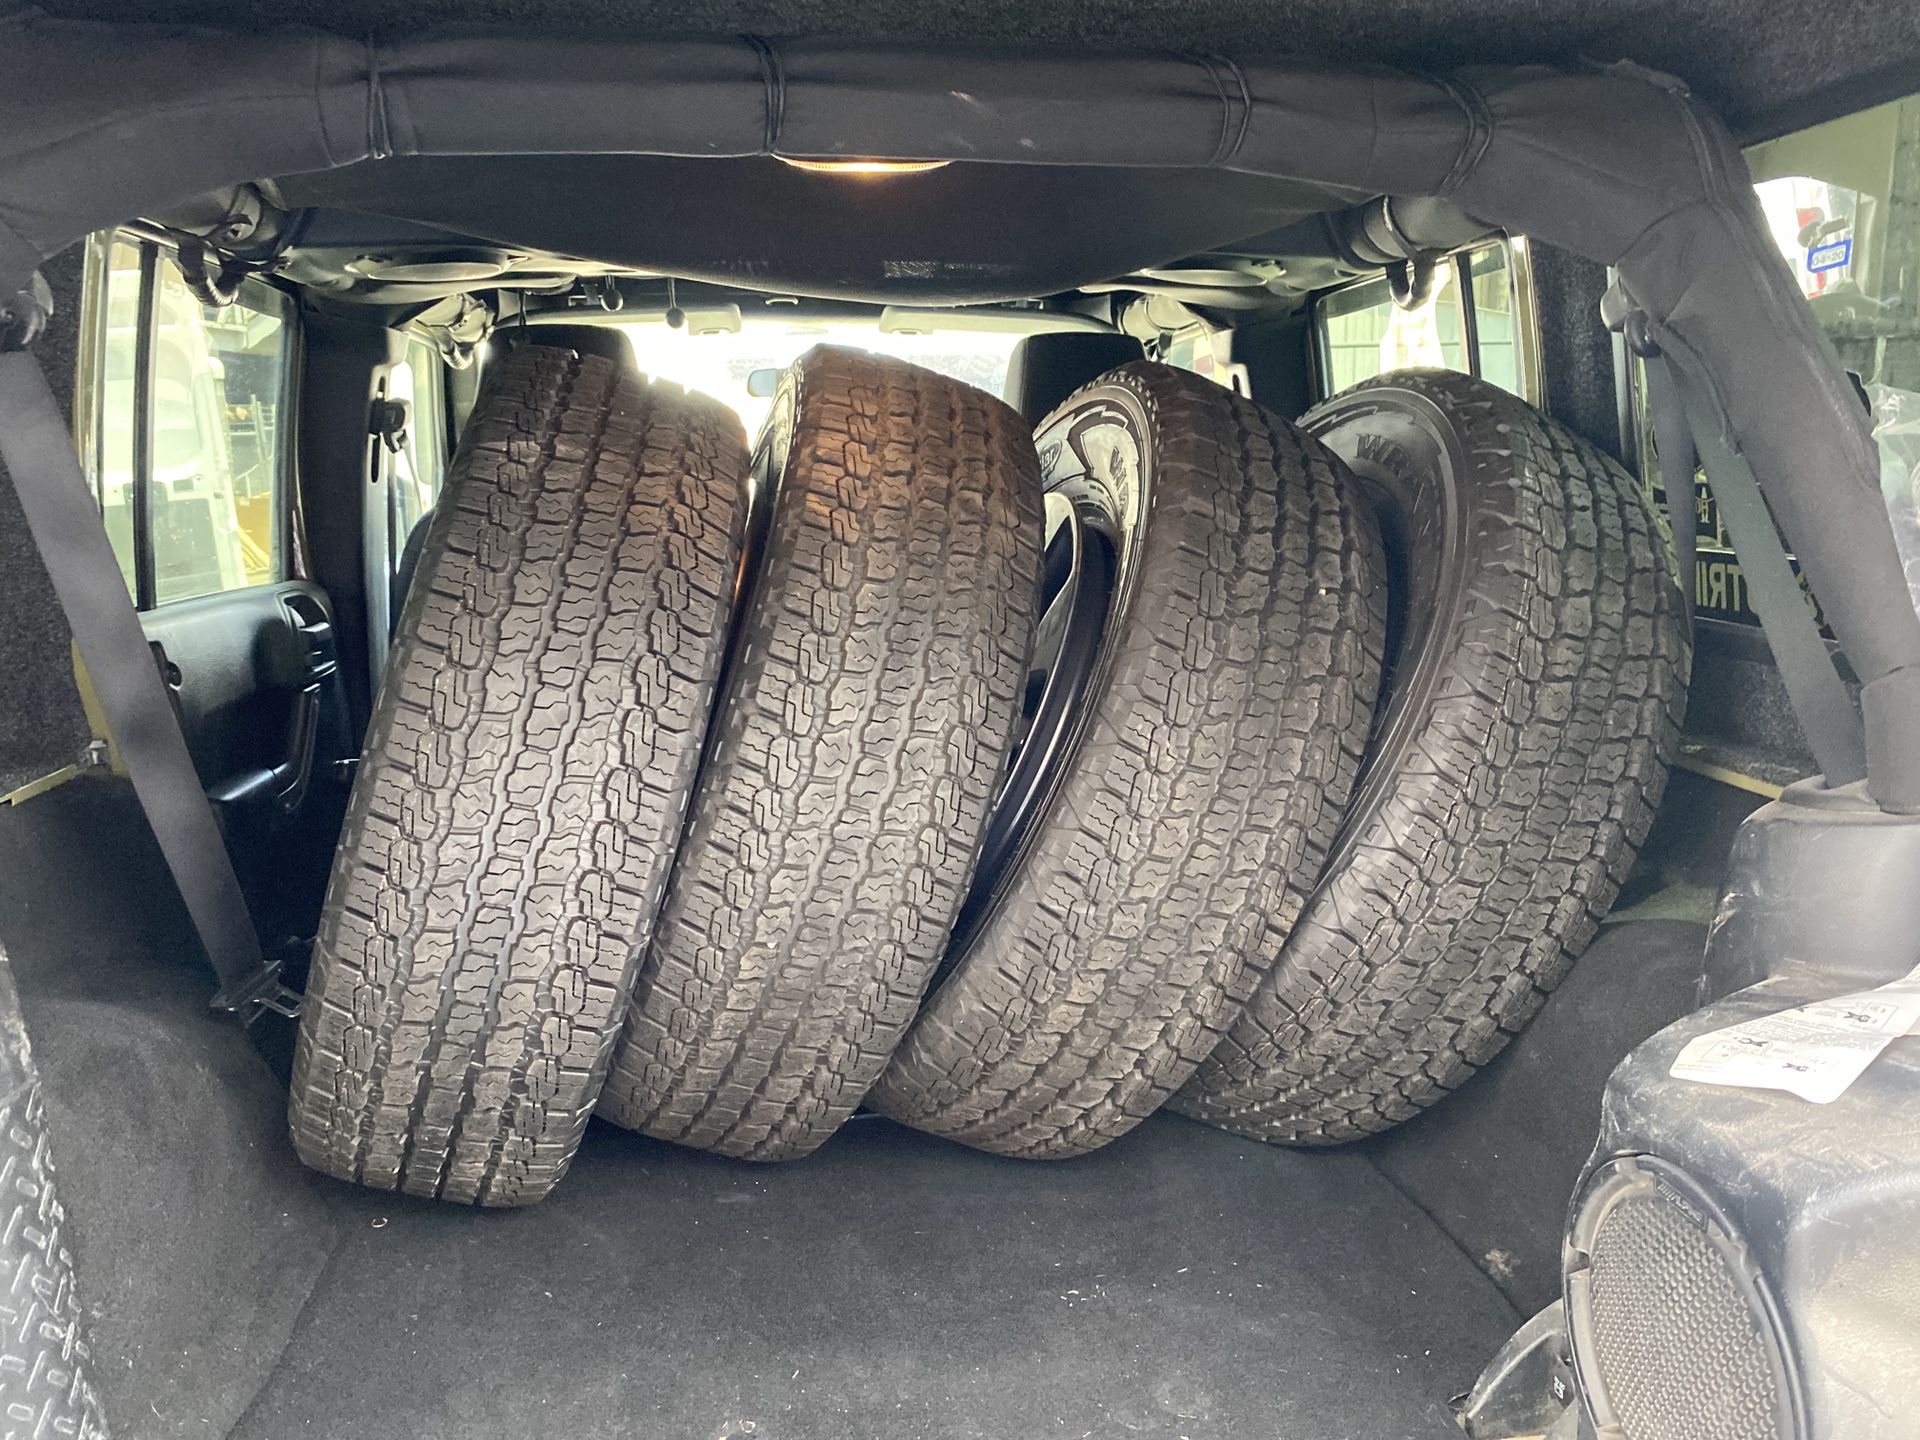 5 brand new Jeep wheels & tires